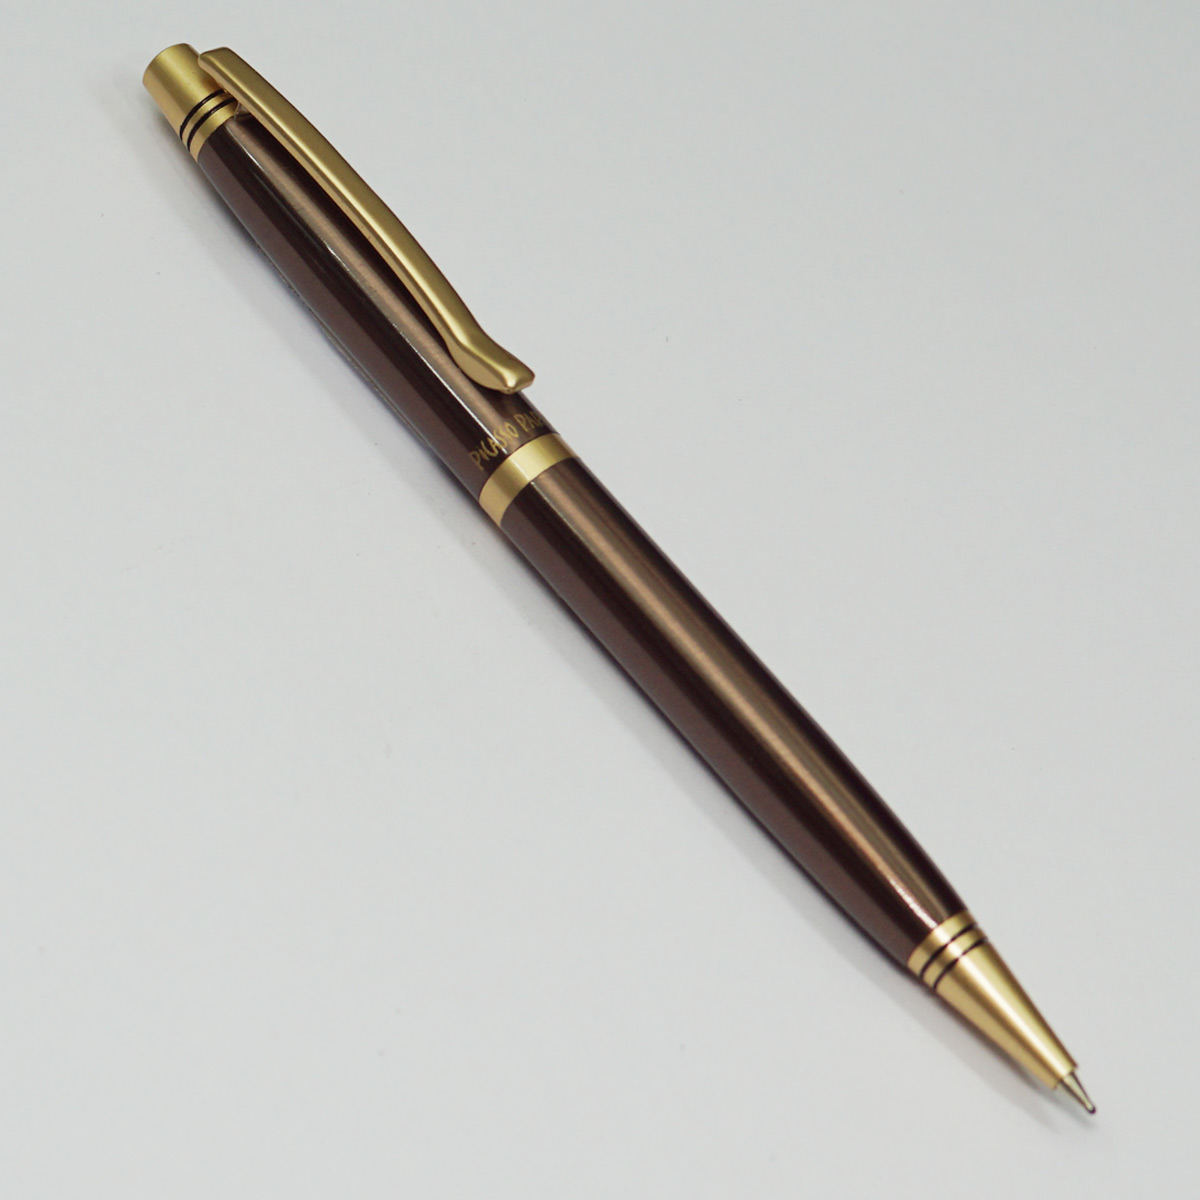 Picasso Parri Vista Chocolate Brown Color Body With Gold Clip Fine Tip Twist Type Ball Pen SKU 22853